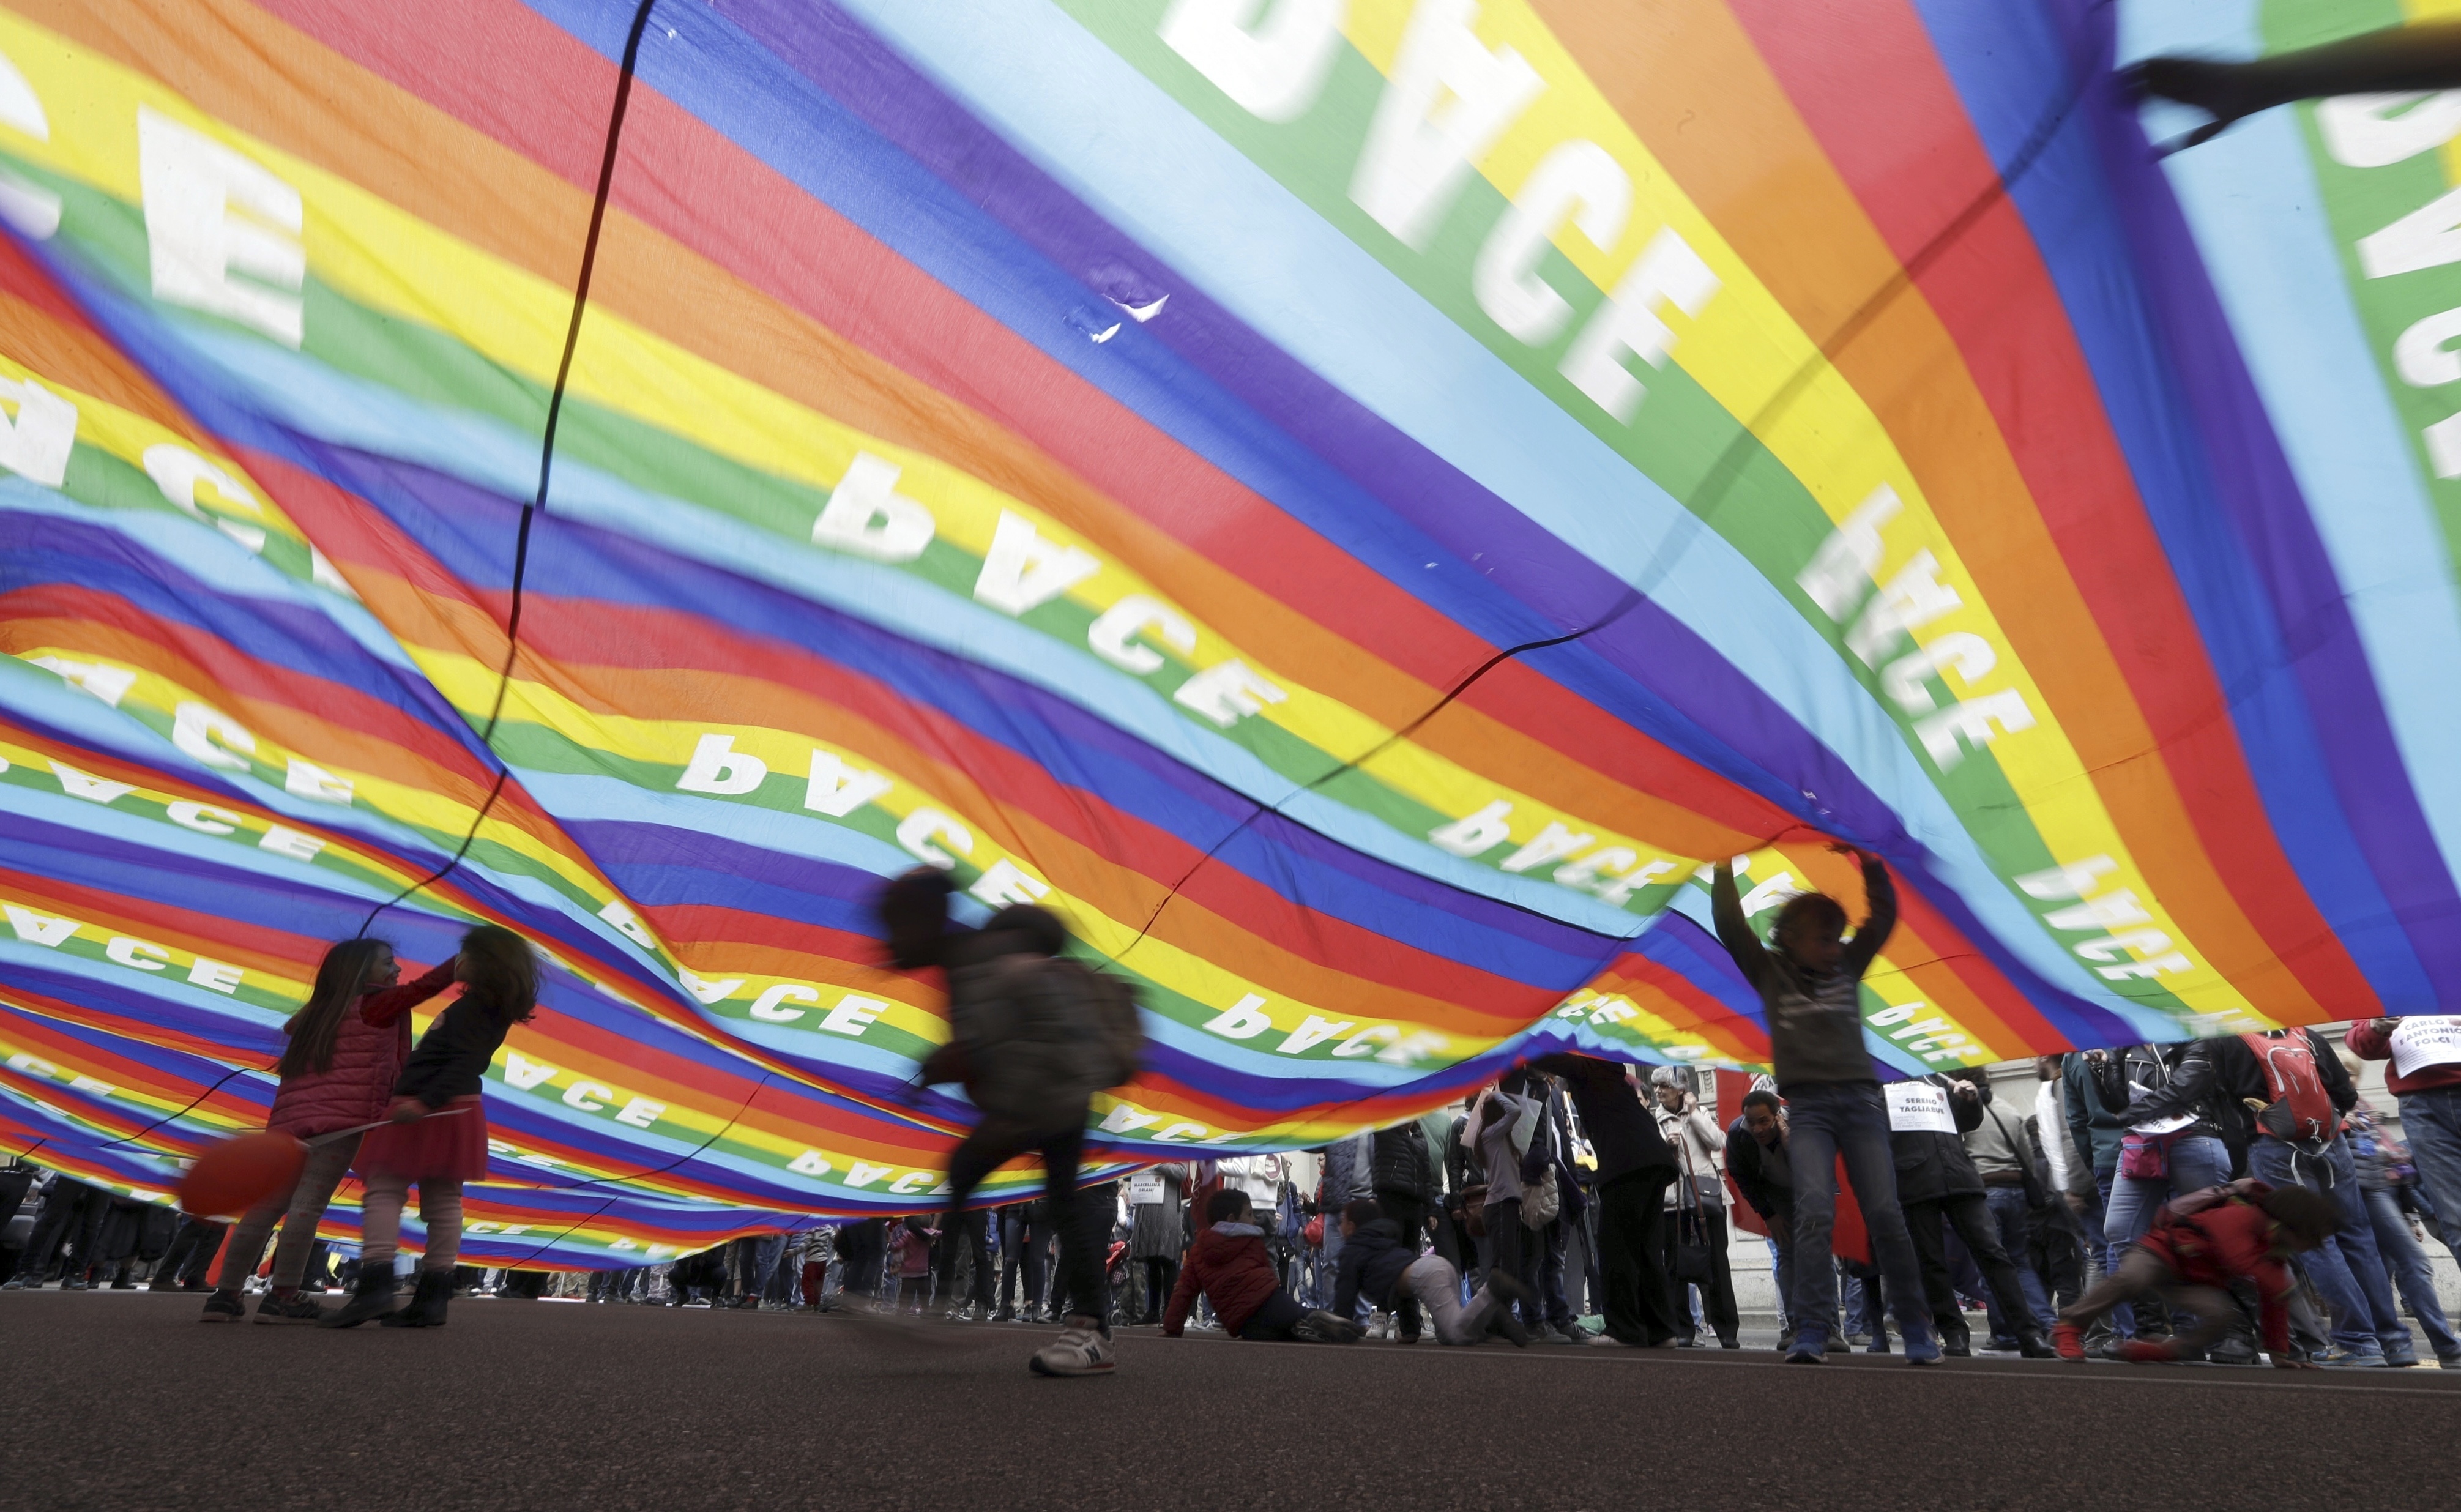 People unfold a giant rainbow flag reading peace as they march during a demonstration to mark Italy's Liberation day, in Milan, Italy, Tuesday, April 25, 2017. Italy is celebrating the anniversary of a partisan uprising against the Nazis and their Fascist allies at the end of World War II. (AP Photo/Luca Bruno)